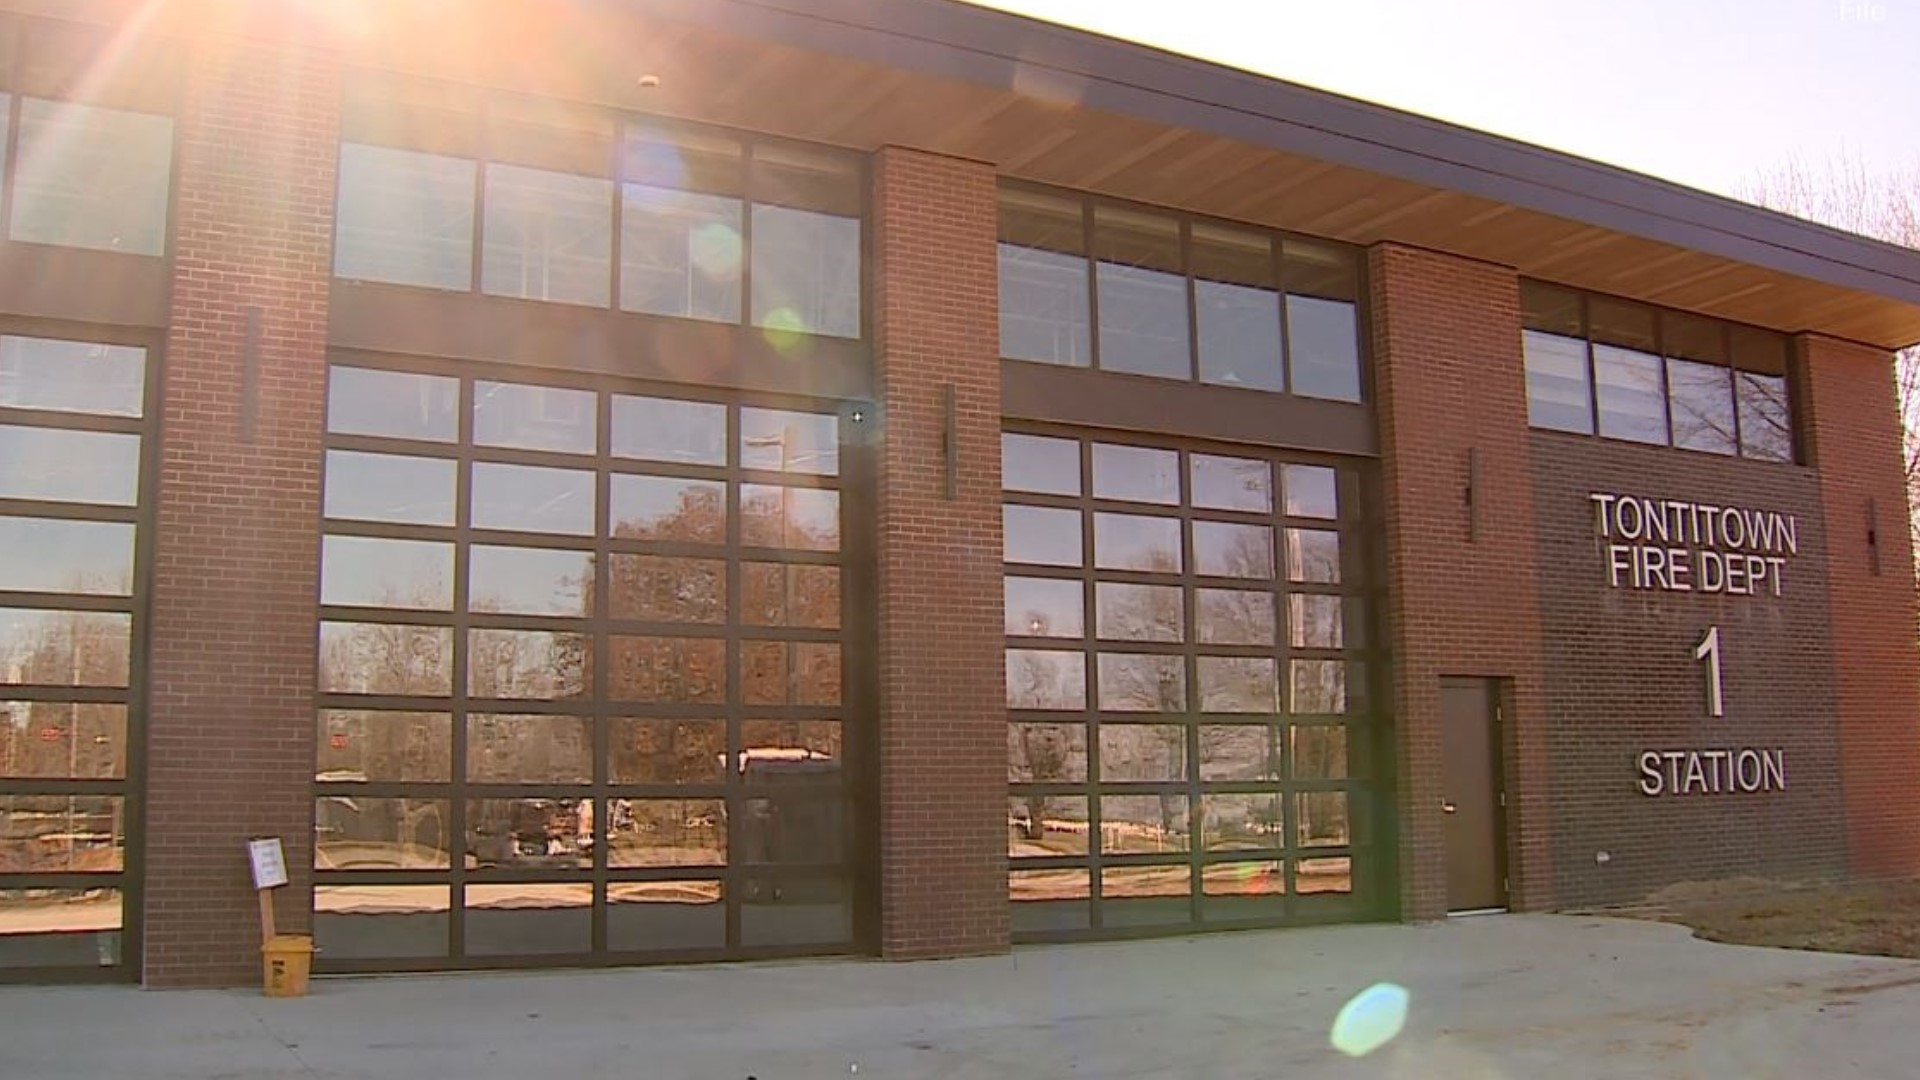 Watch the video to take a sneak peek at Tontitown's new fire department.